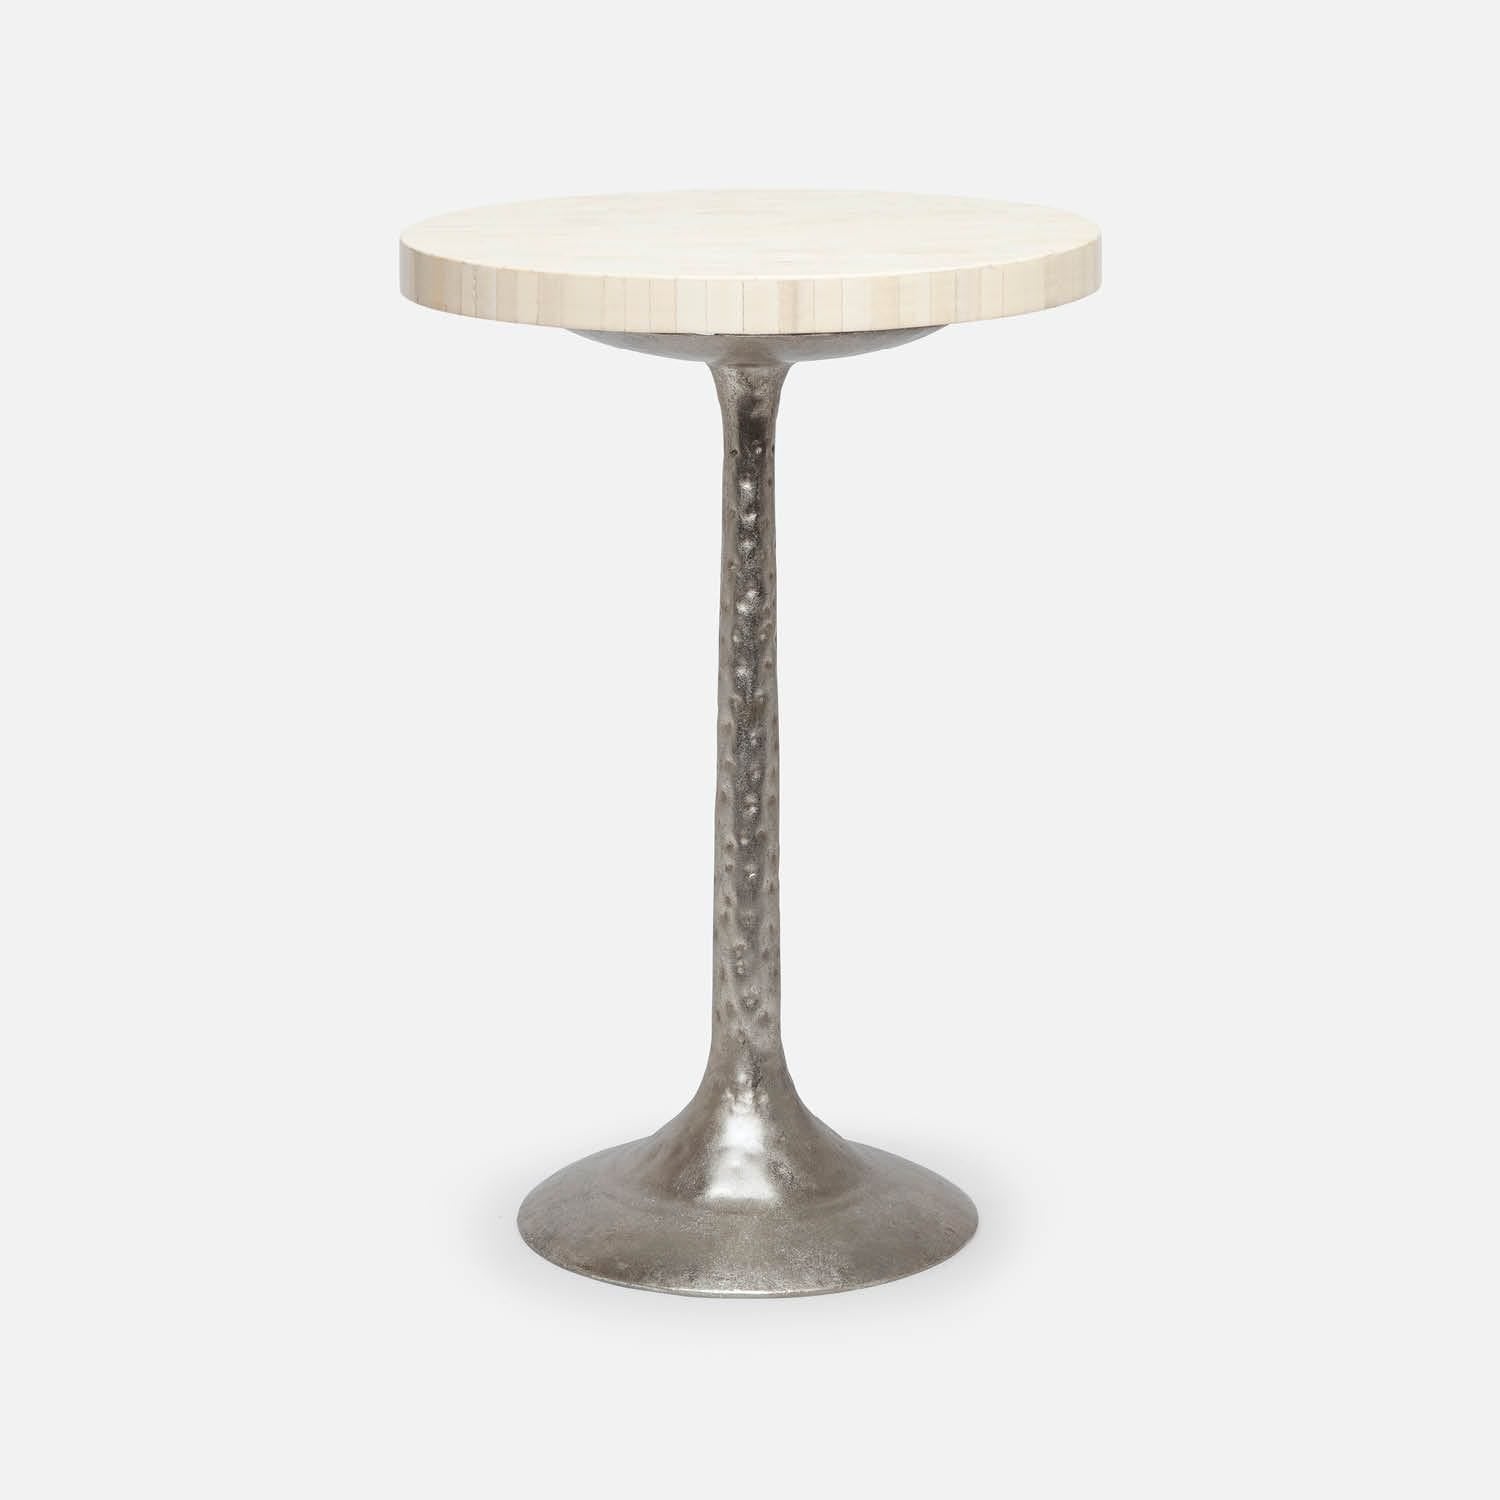 Made Goods - Furniture - Delancy Side Table - Shiny Silver Metal/Bone Natural - Union Lighting Luminaires Decor